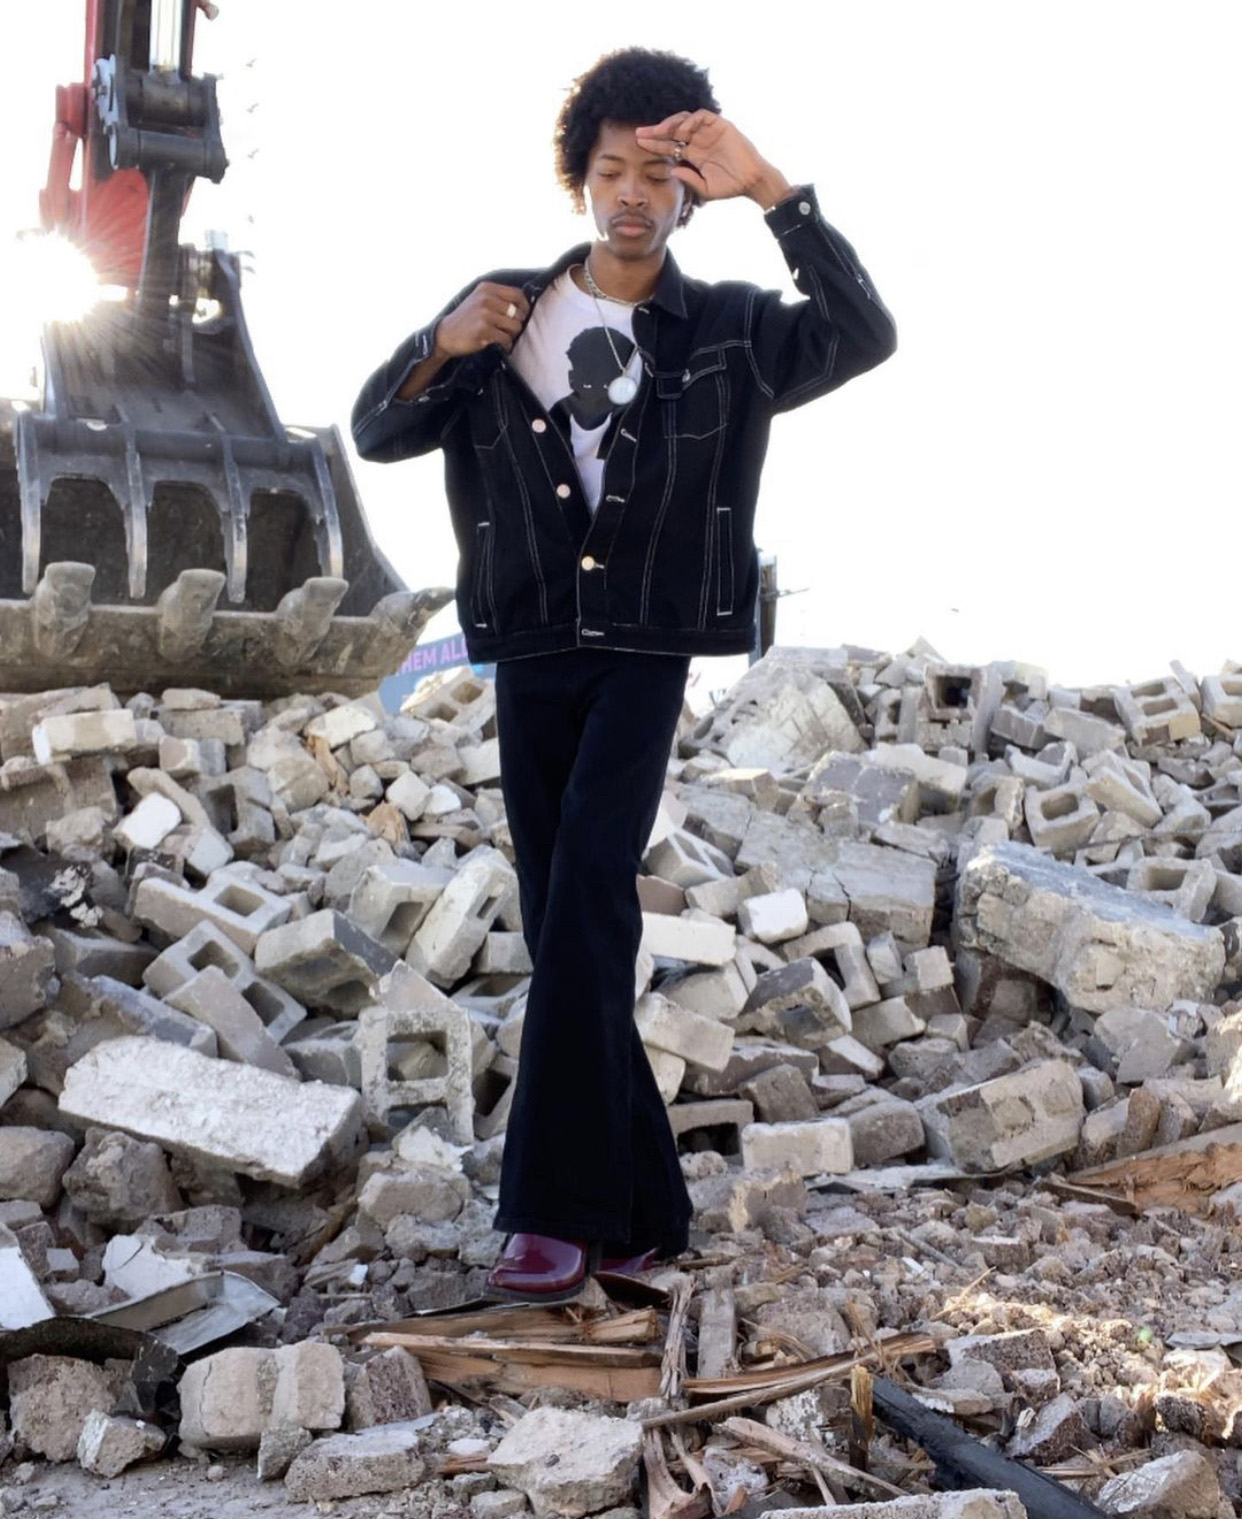 Katriel standing on a pile of cinder blocks wearing a black denim jacket over a white t-shirt, black flared pants and burgundy boots